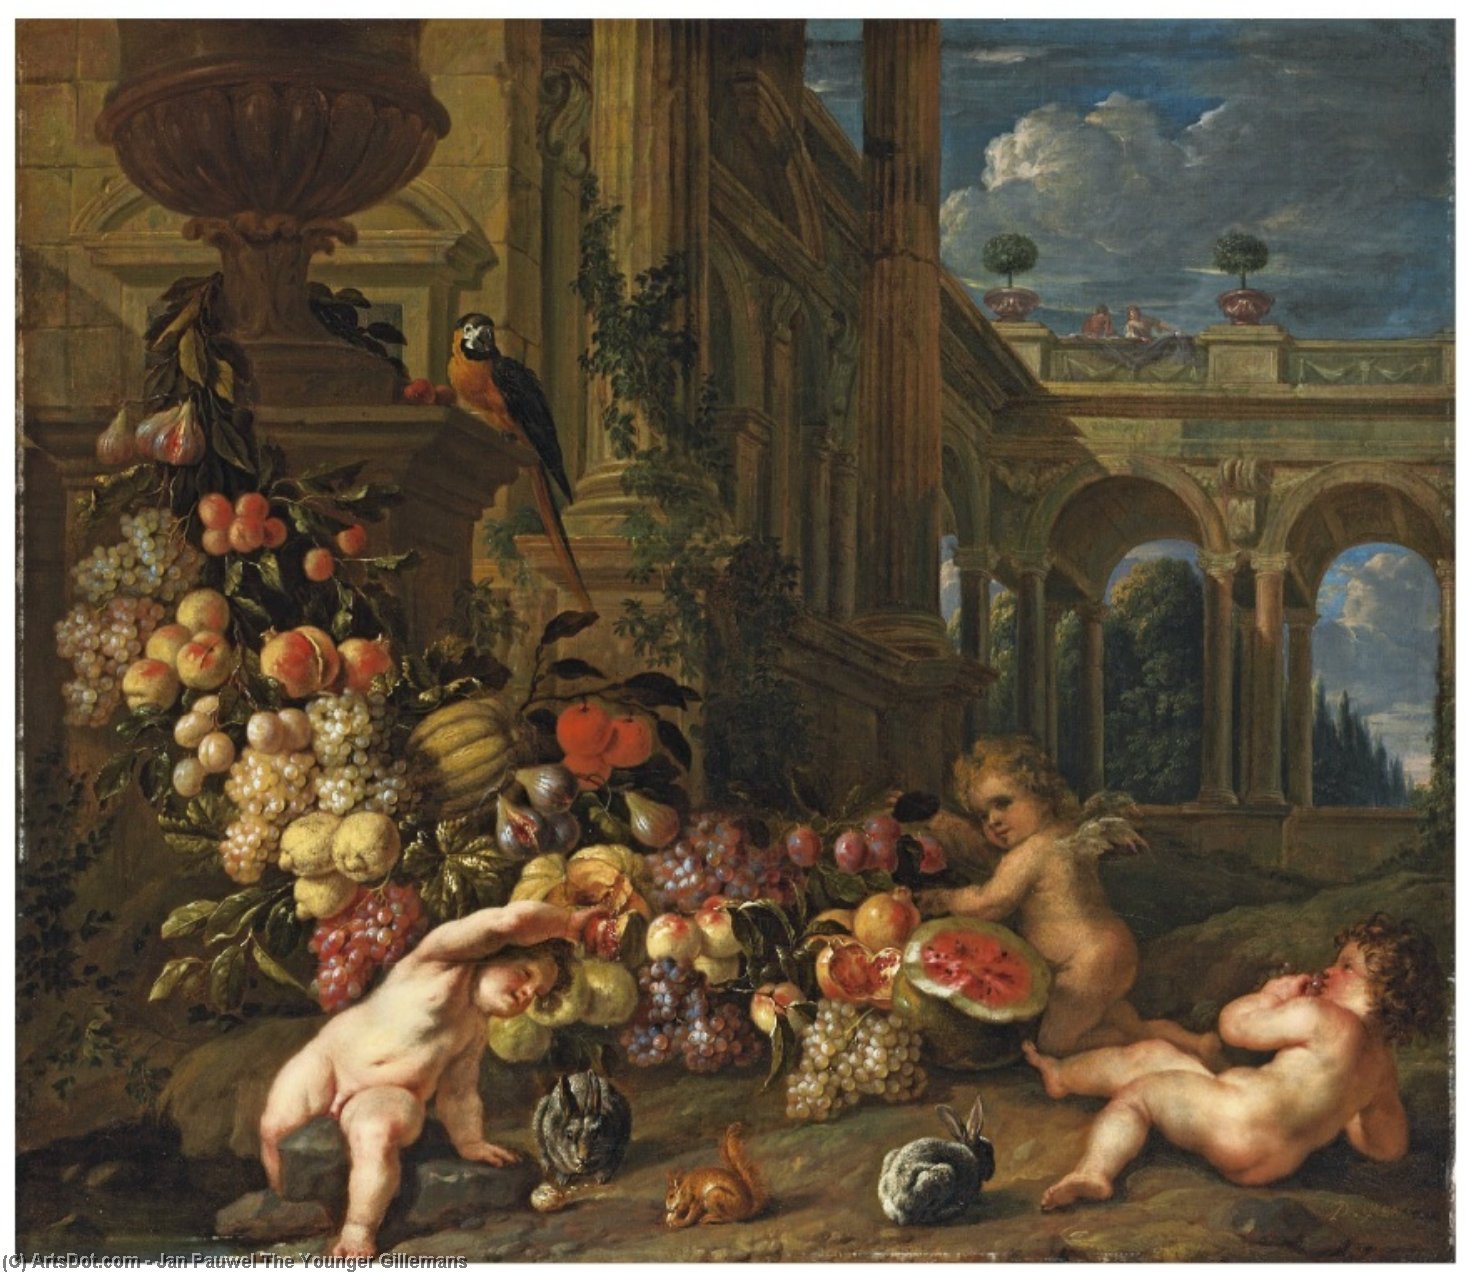 WikiOO.org - 백과 사전 - 회화, 삽화 Jan Pauwel The Younger Gillemans - An architectural capriccio with putti around a swag of fruit, with a parrot, squirrel and rabbits